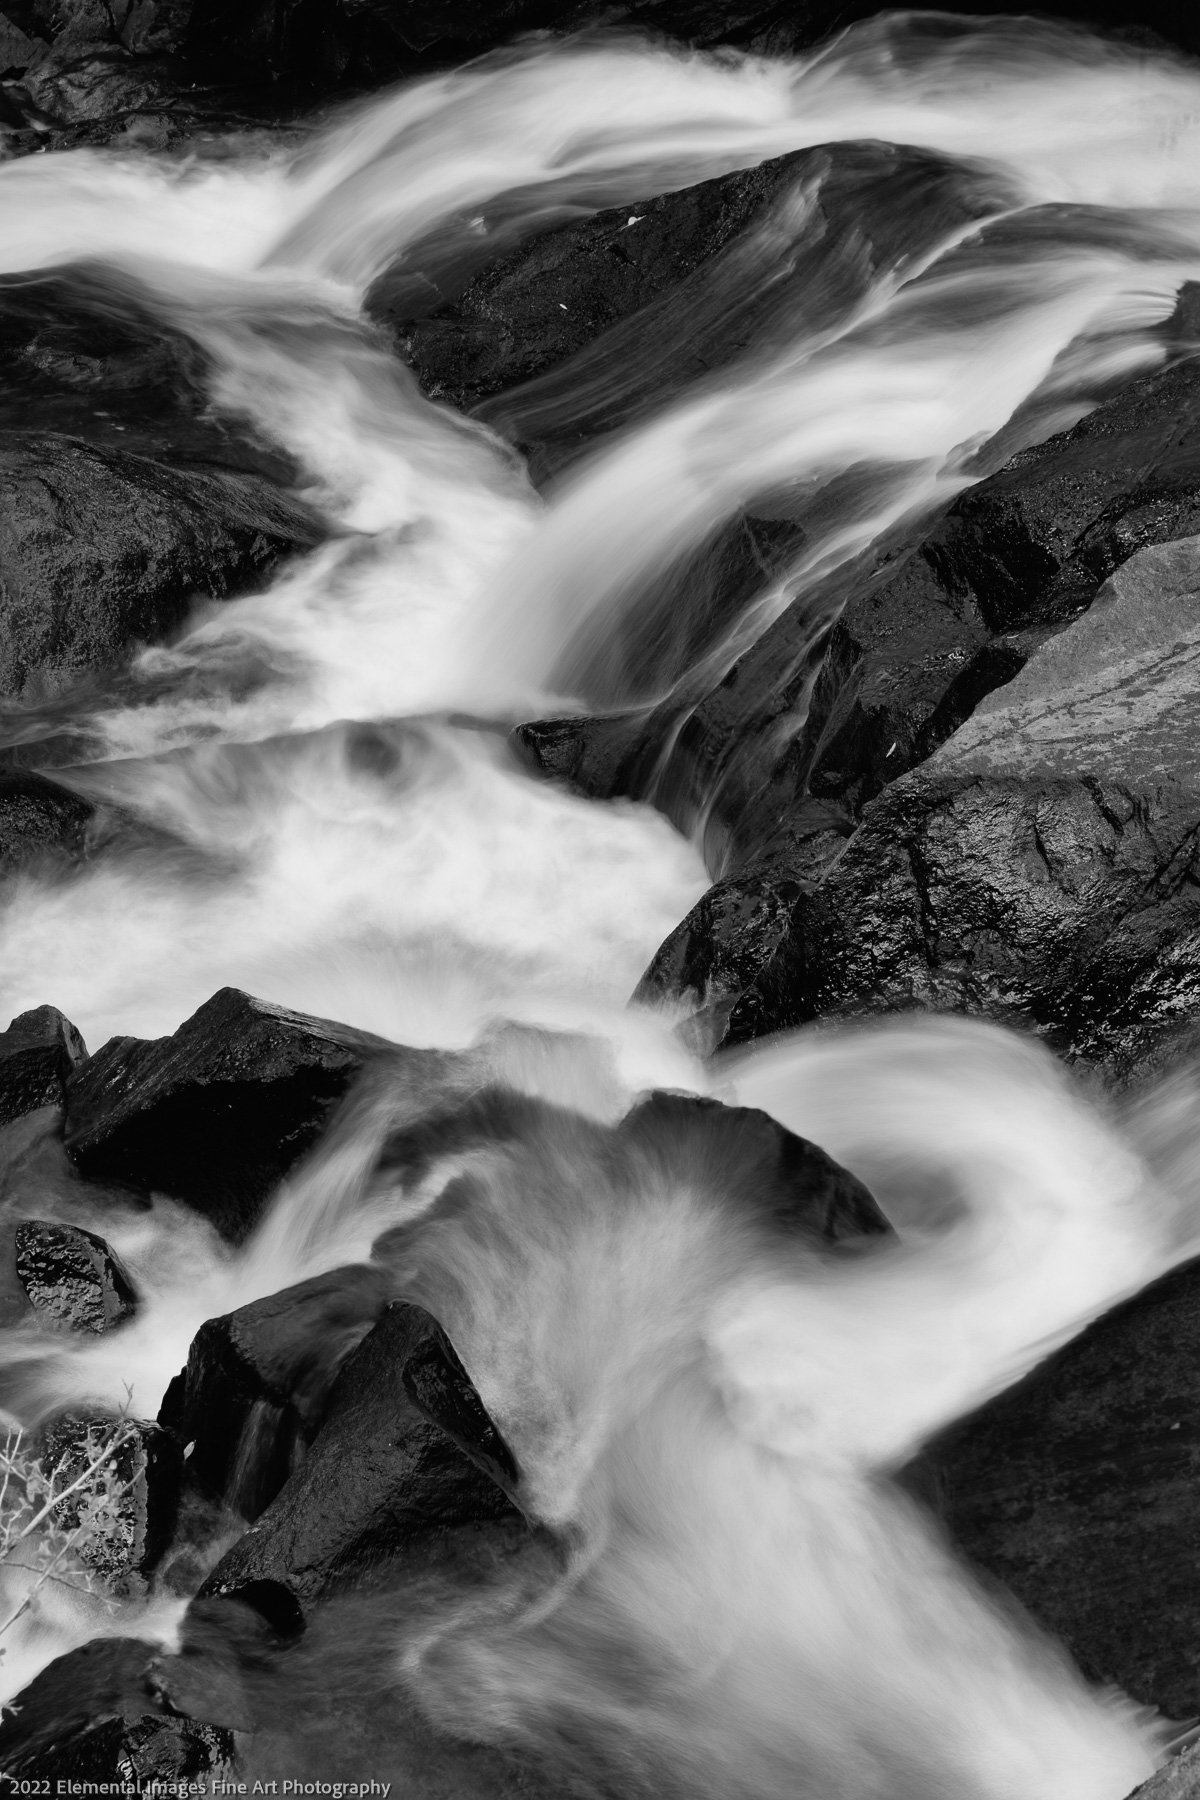 A Swift Stream | Lee Vining Canyon | CA | USA - © 2022 Elemental Images Fine Art Photography - All Rights Reserved Worldwide